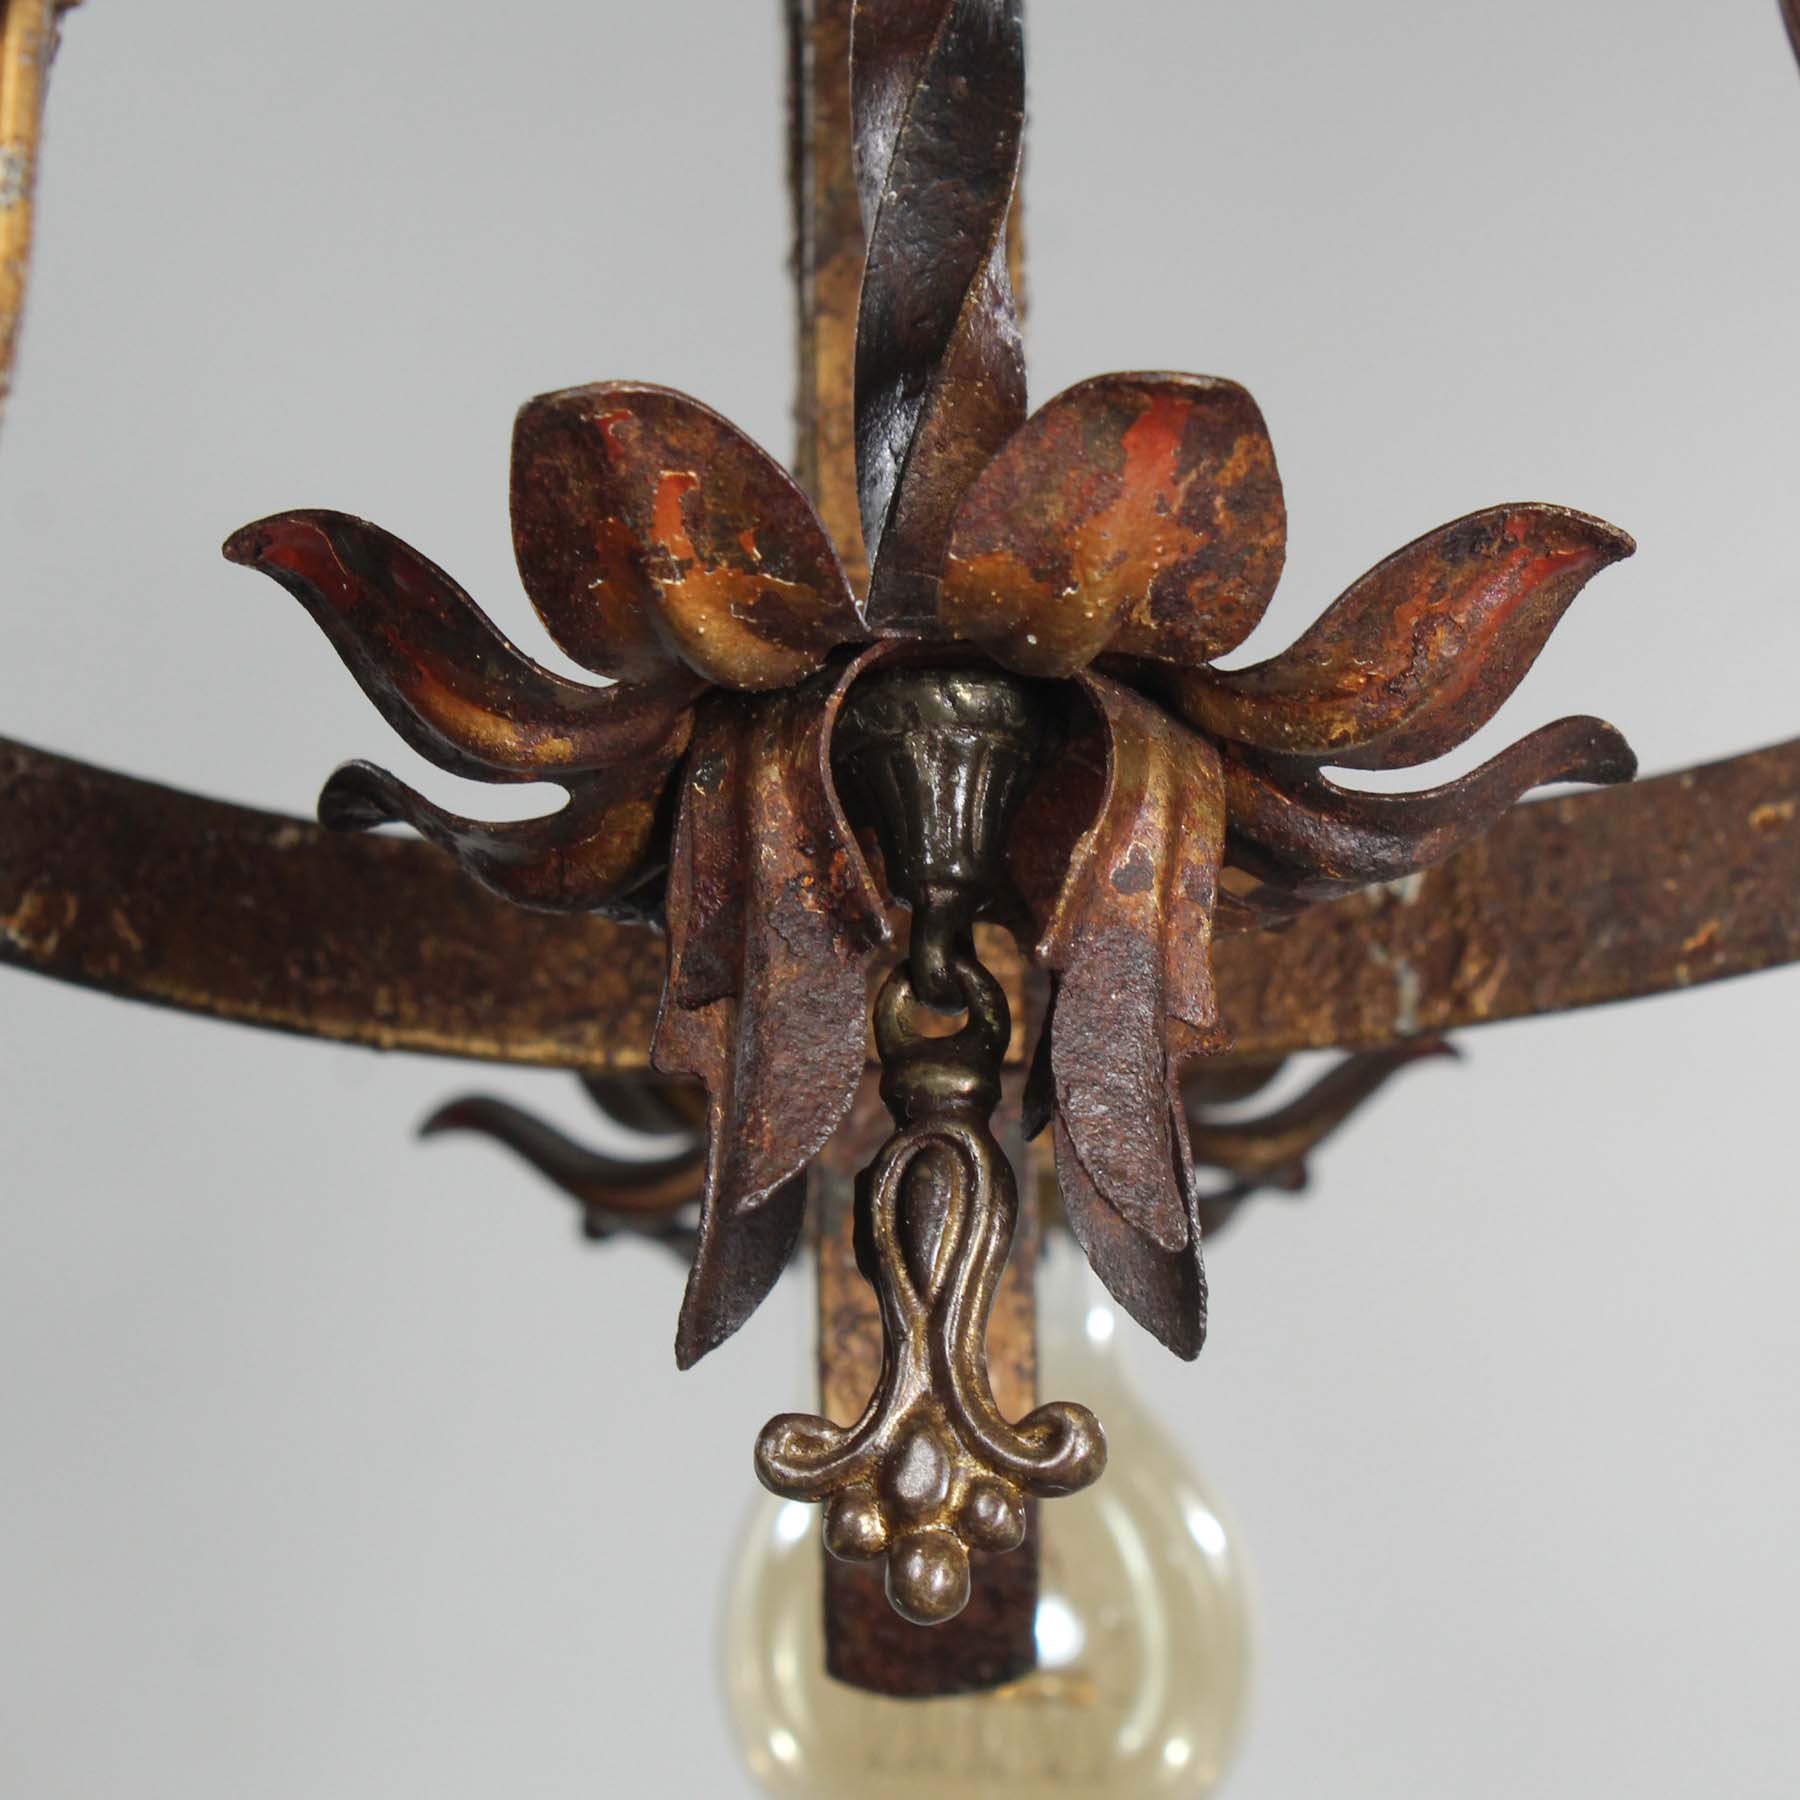 SOLD Antique Five-Light Iron Chandelier with Flowers, c. 1920s -70668